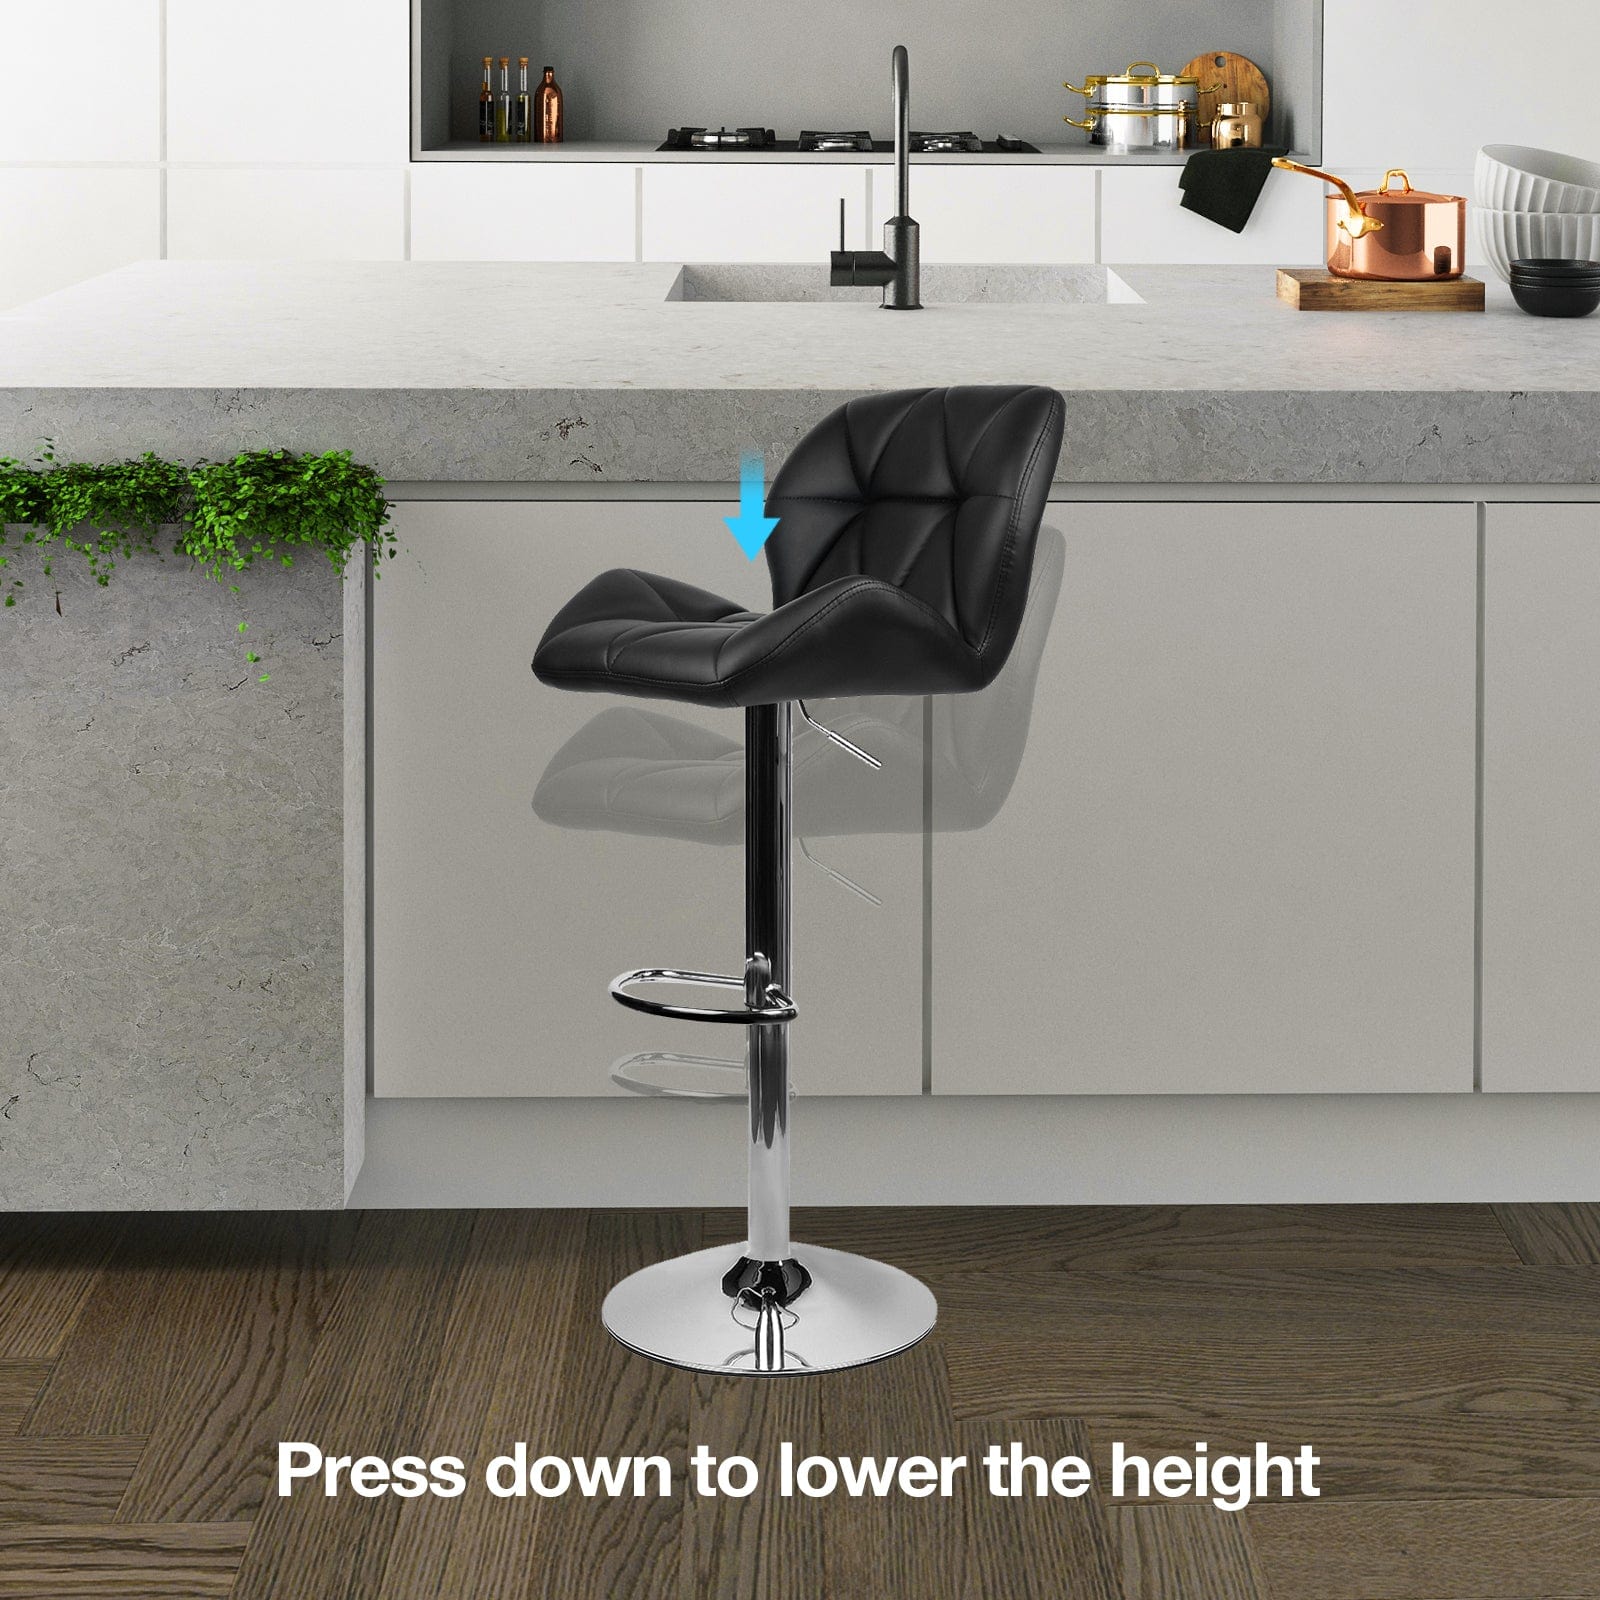 Elecwish Barstools Set of 2 Bar Stools OW001 can press down to lower the height